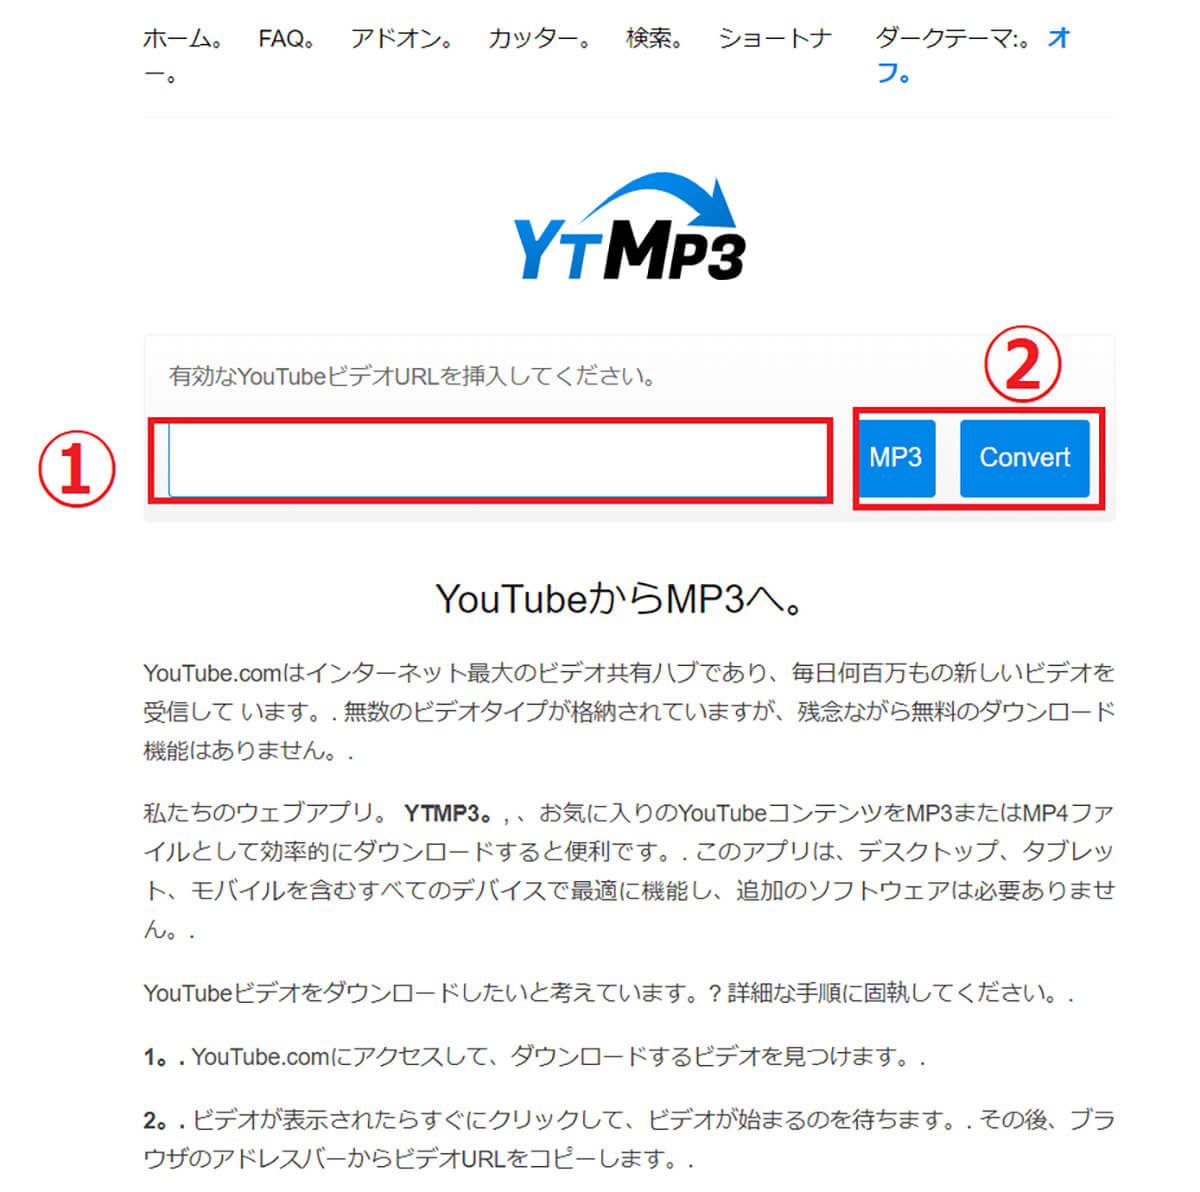 Youtube to mp3 converter1